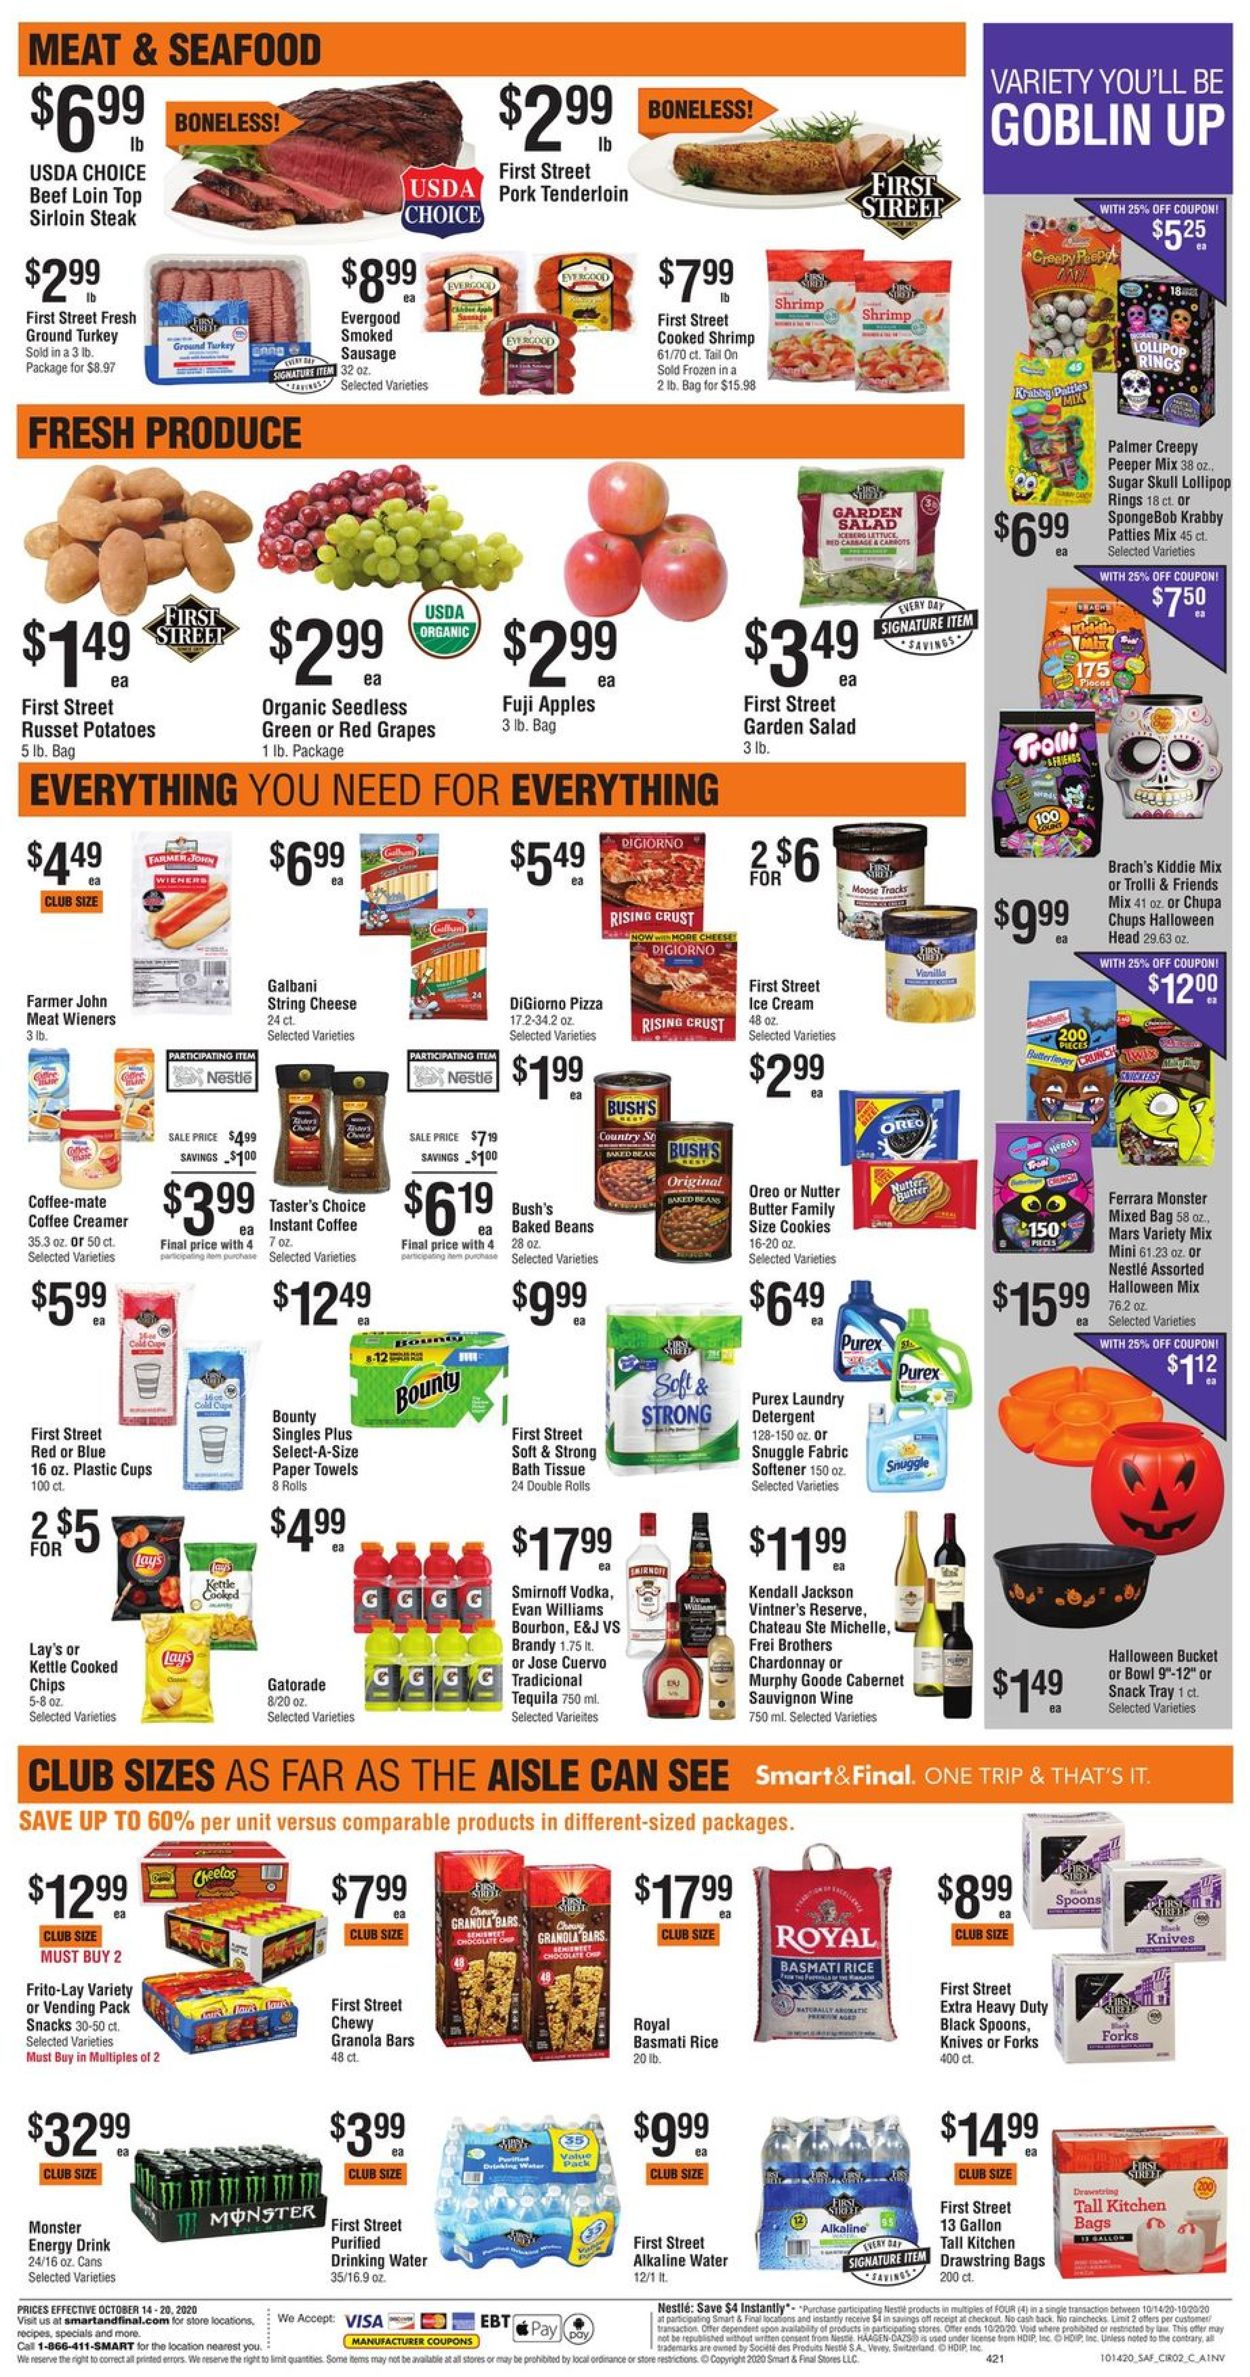 Smart and Final Current weekly ad 10/14 - 10/20/2020 [2] - frequent-ads.com